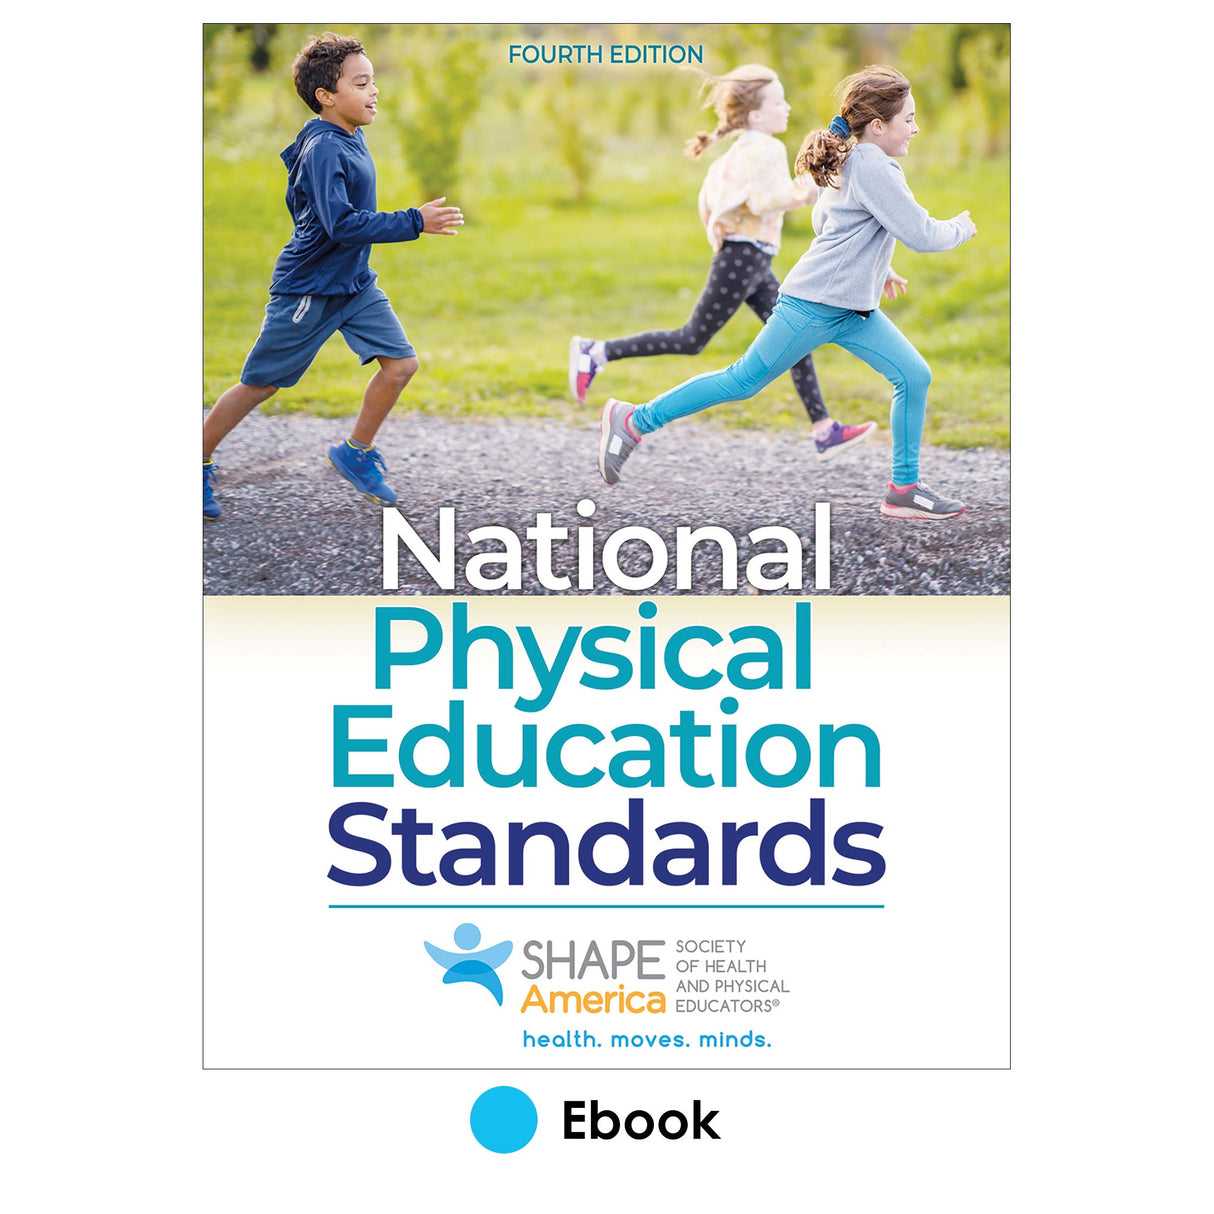 National Physical Education Standards 4th Edition epub